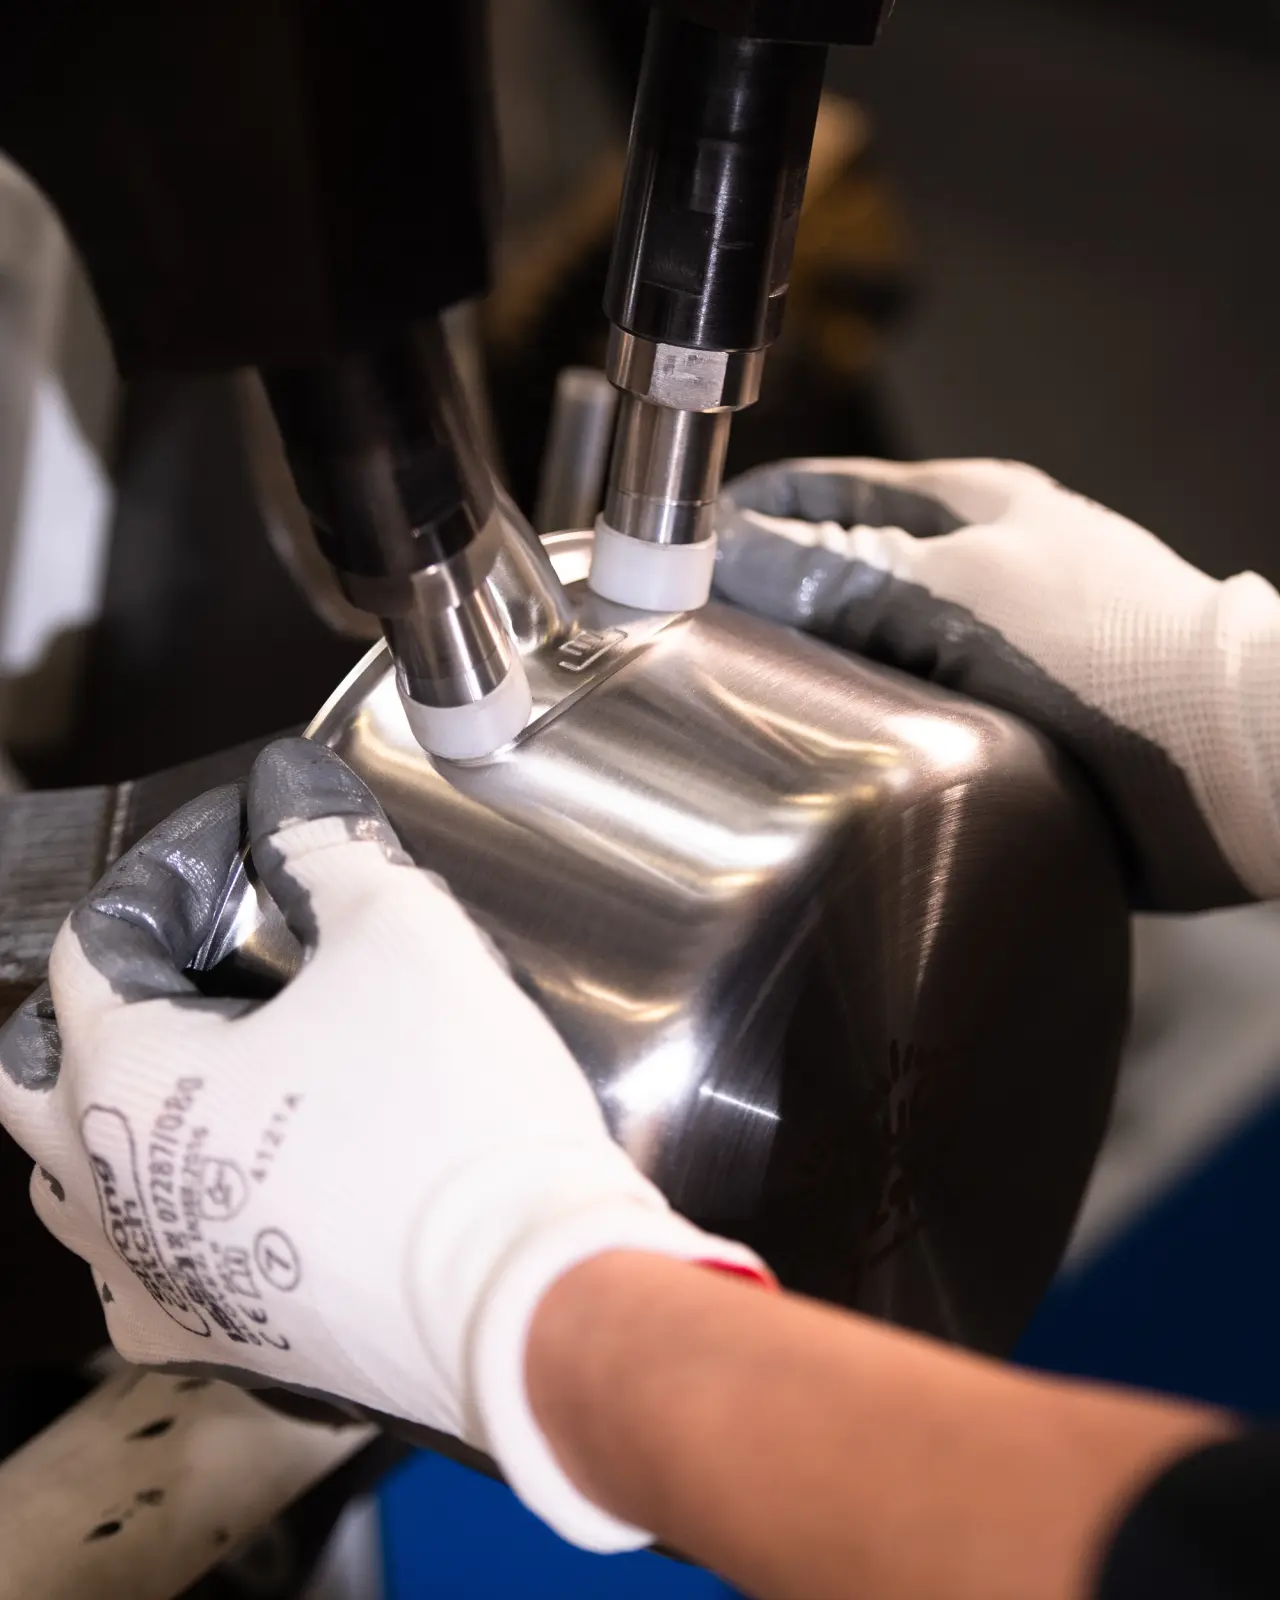 A pair of hands wearing white gloves holds a metallic part while a machine applies a process to its surface.